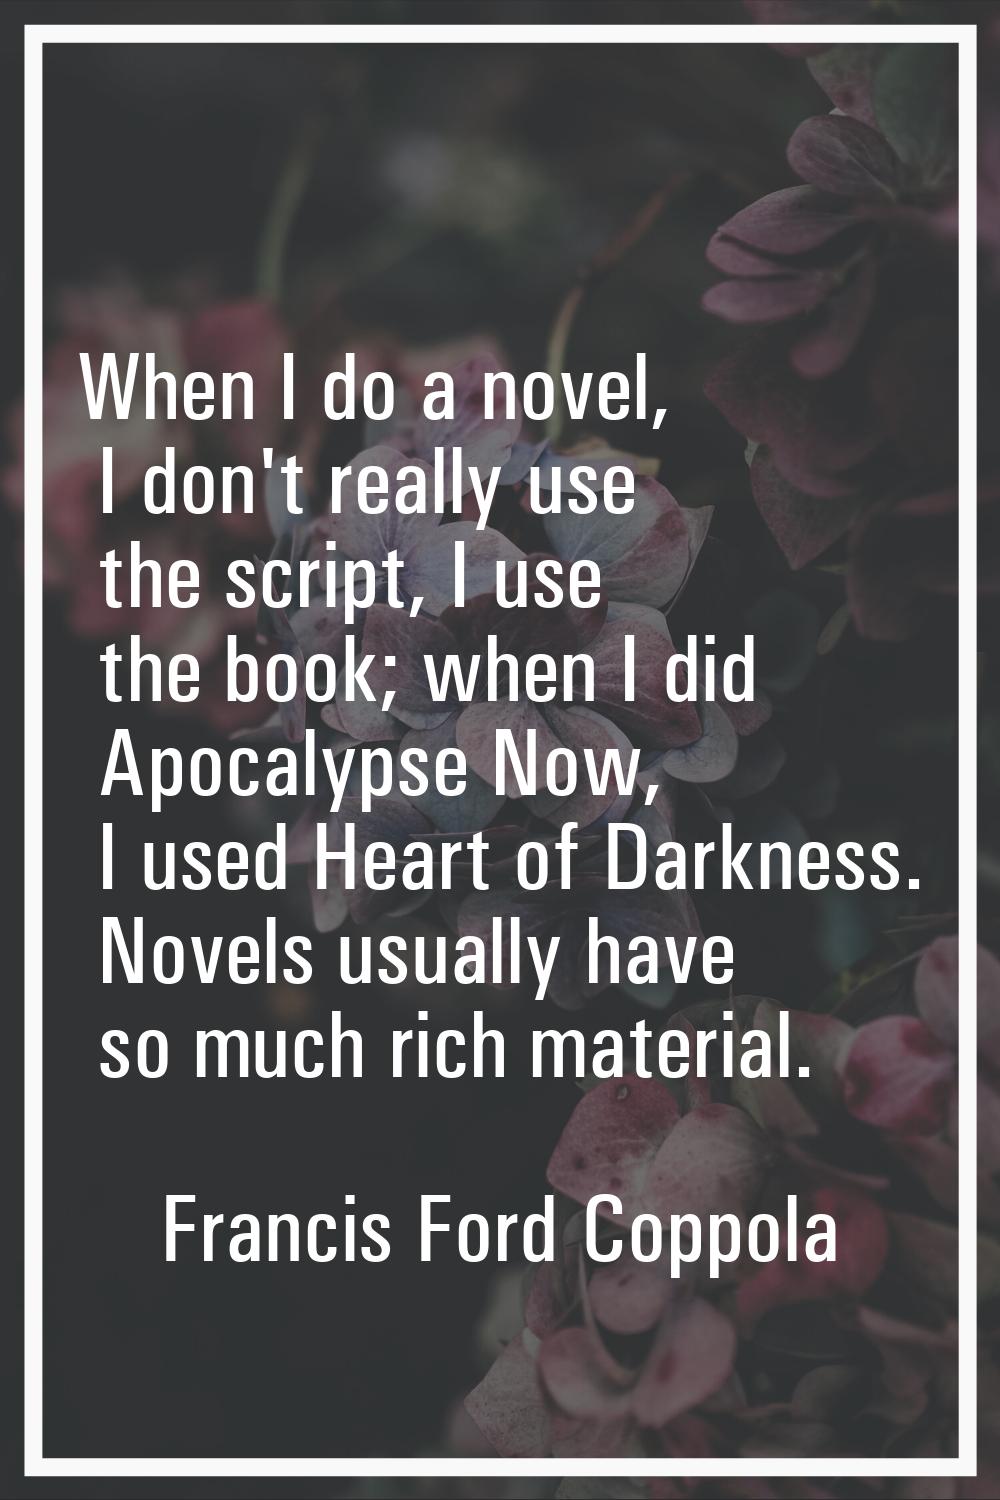 When I do a novel, I don't really use the script, I use the book; when I did Apocalypse Now, I used